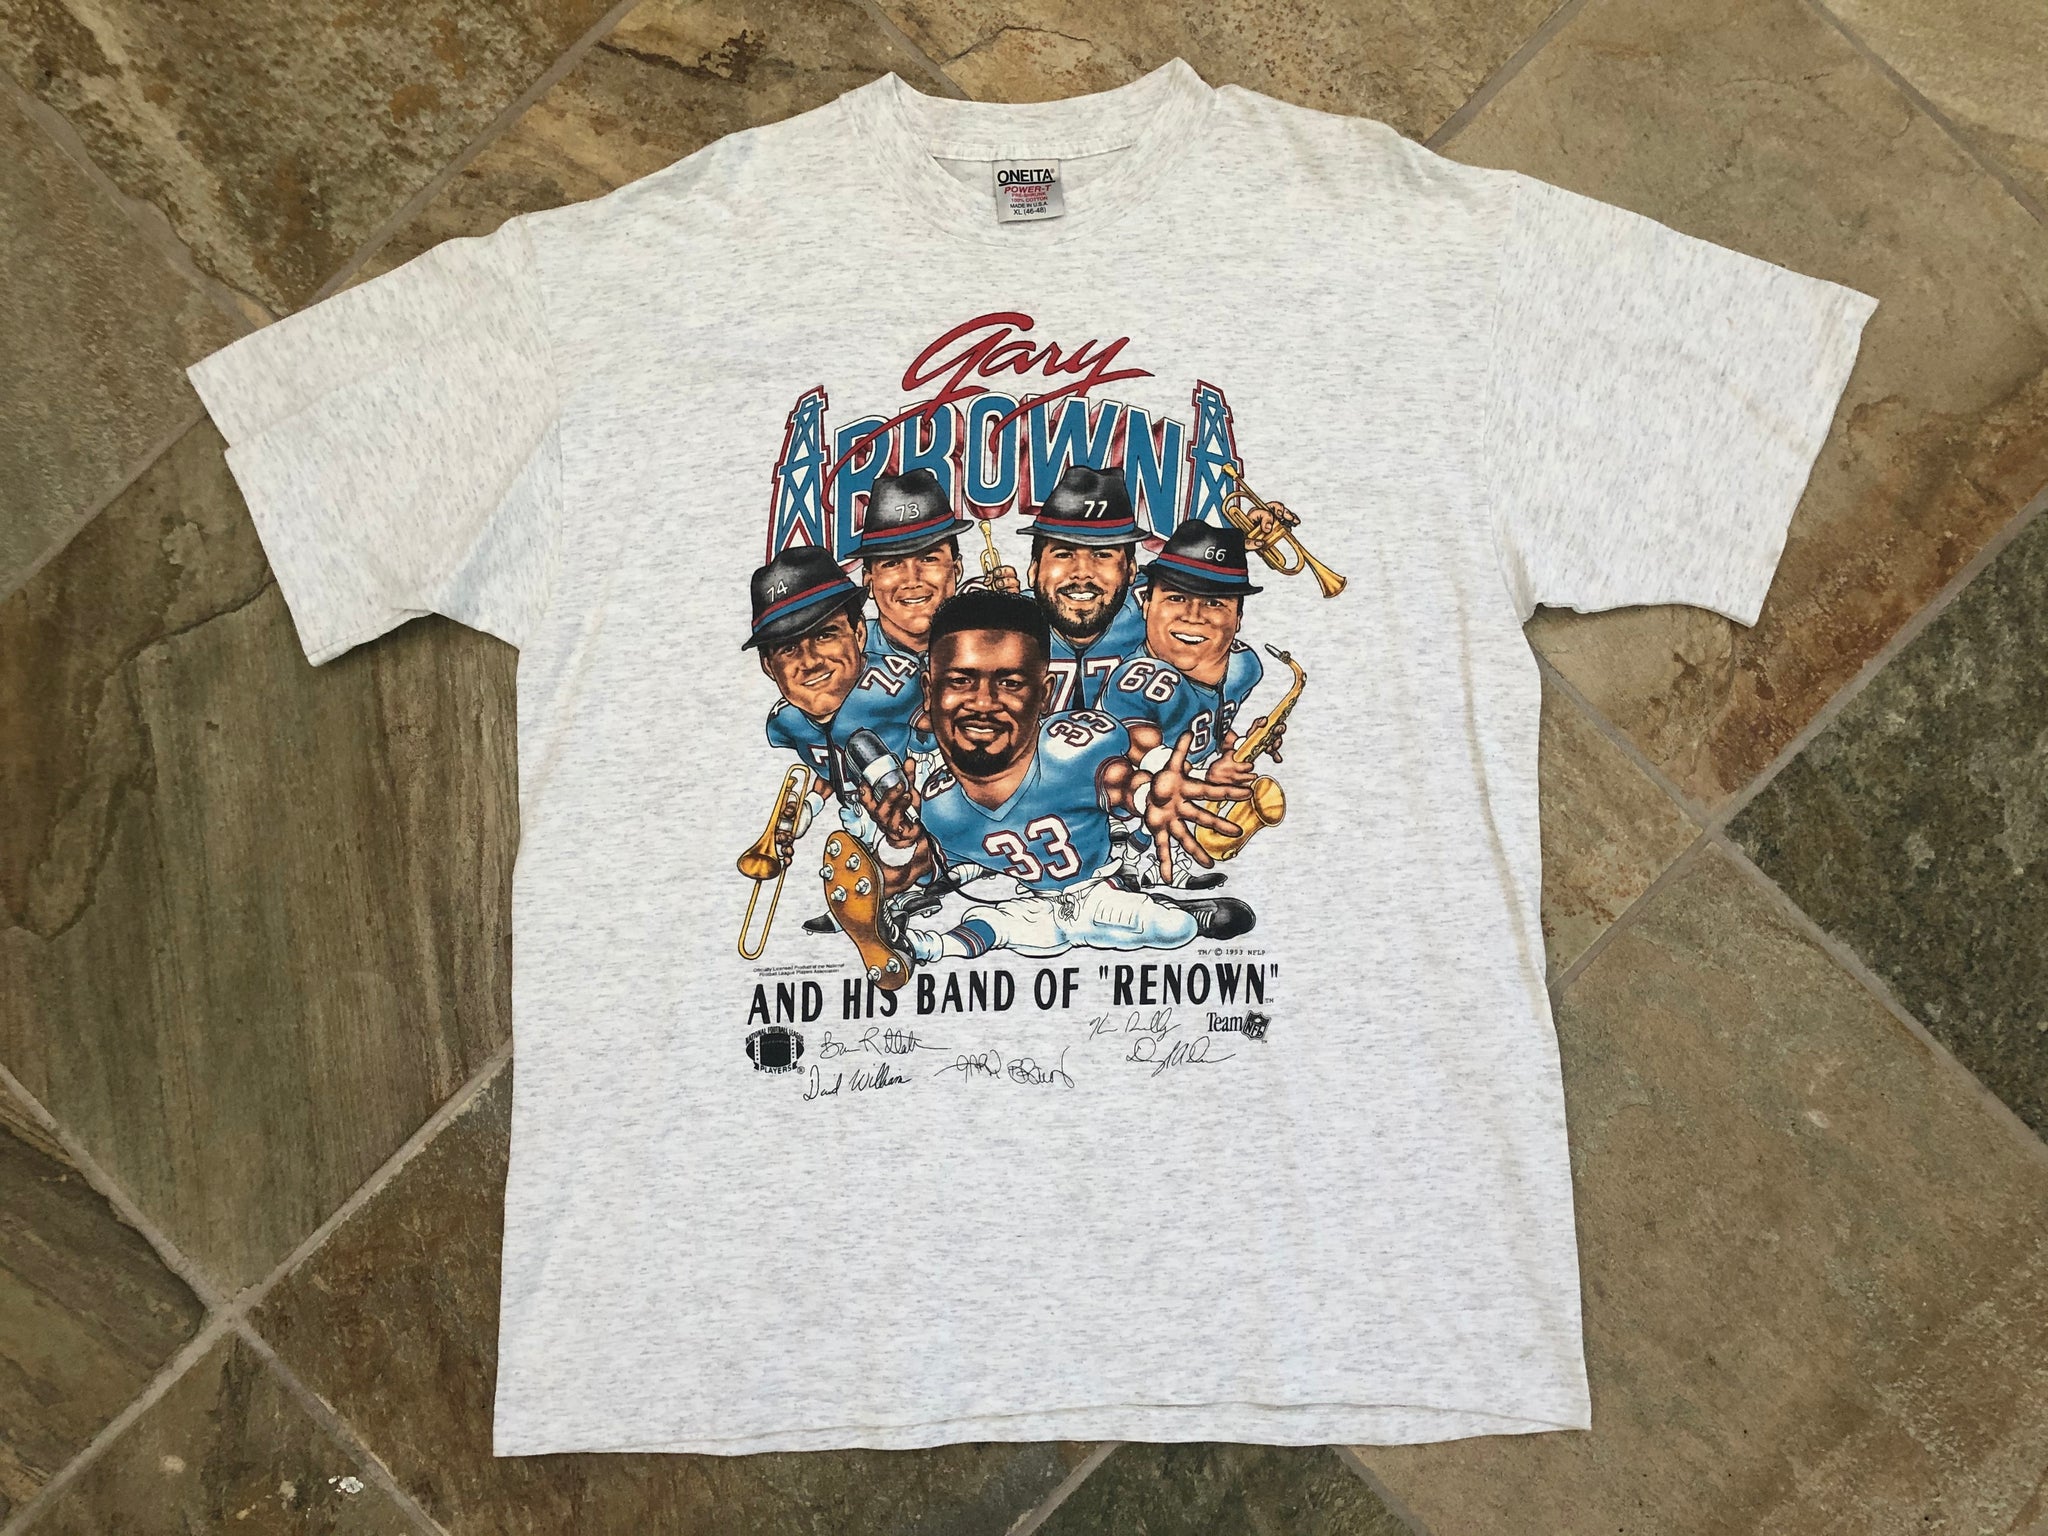 houston oilers shirt products for sale